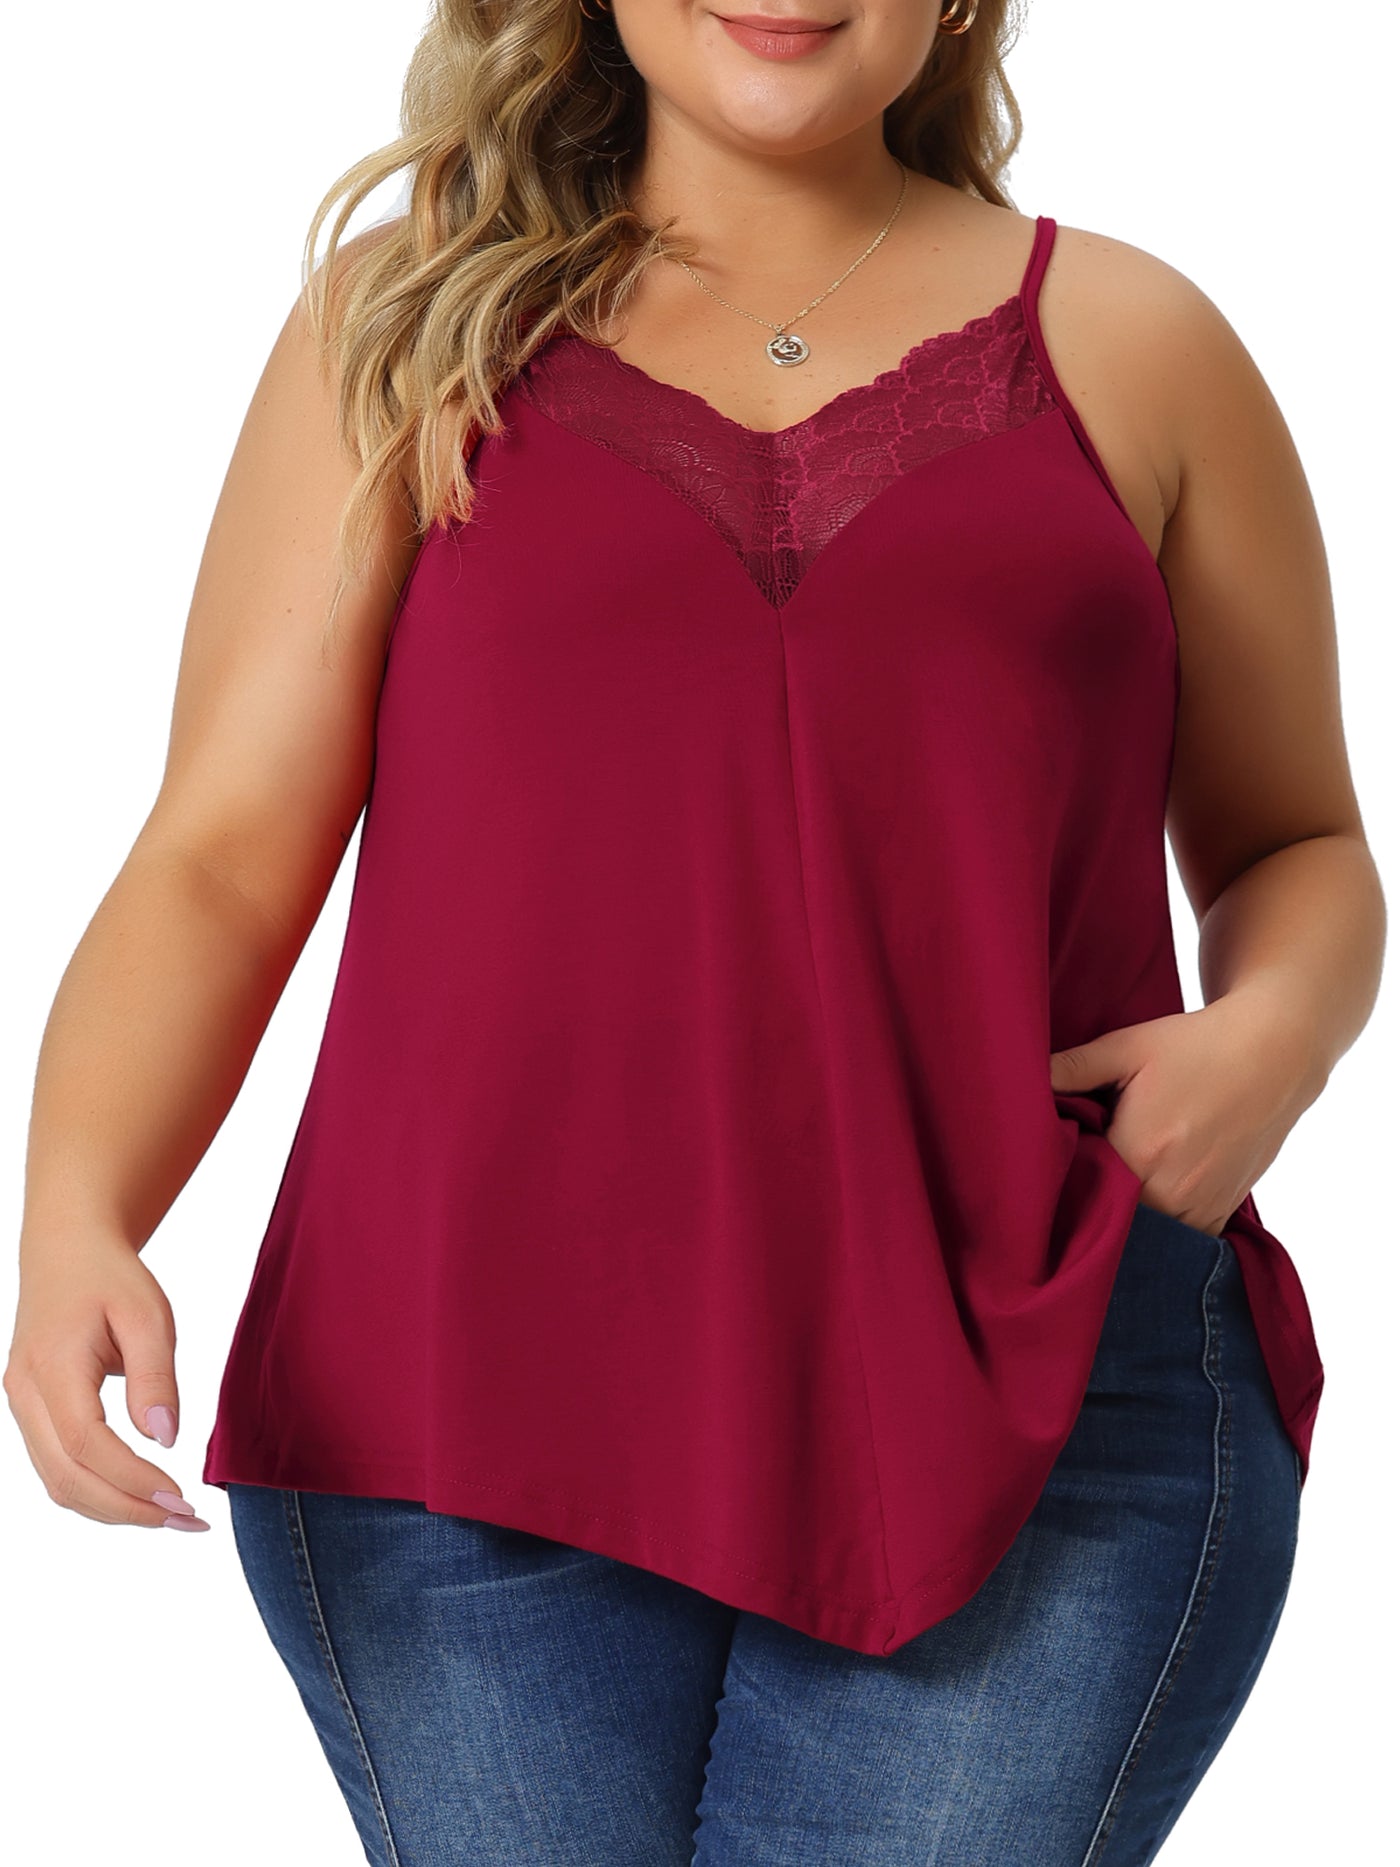 Bublédon Plus Size Cami Tank for Women V-Neck Lace Front Camisole Spaghetti Strap Sleeveless Tops